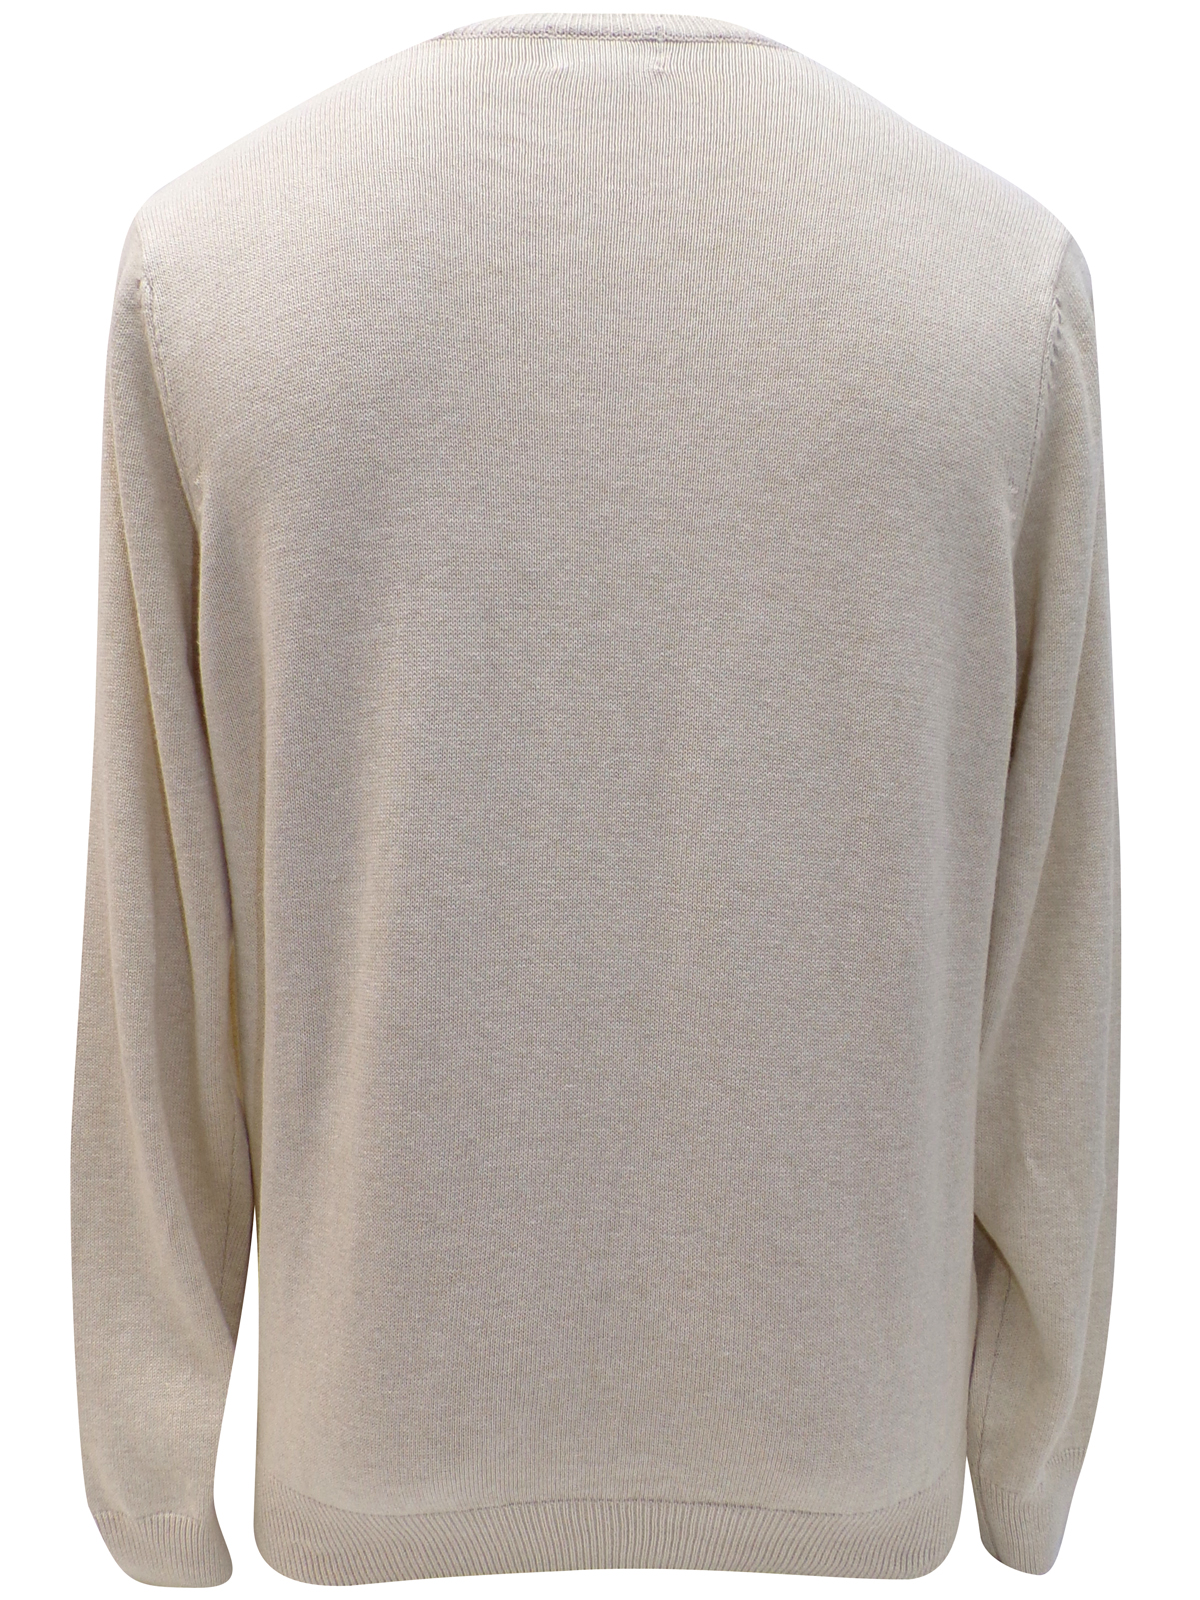 Marks and Spencer - - M&5 SAND Pure Cotton Long Sleeve Jumper - Size ...